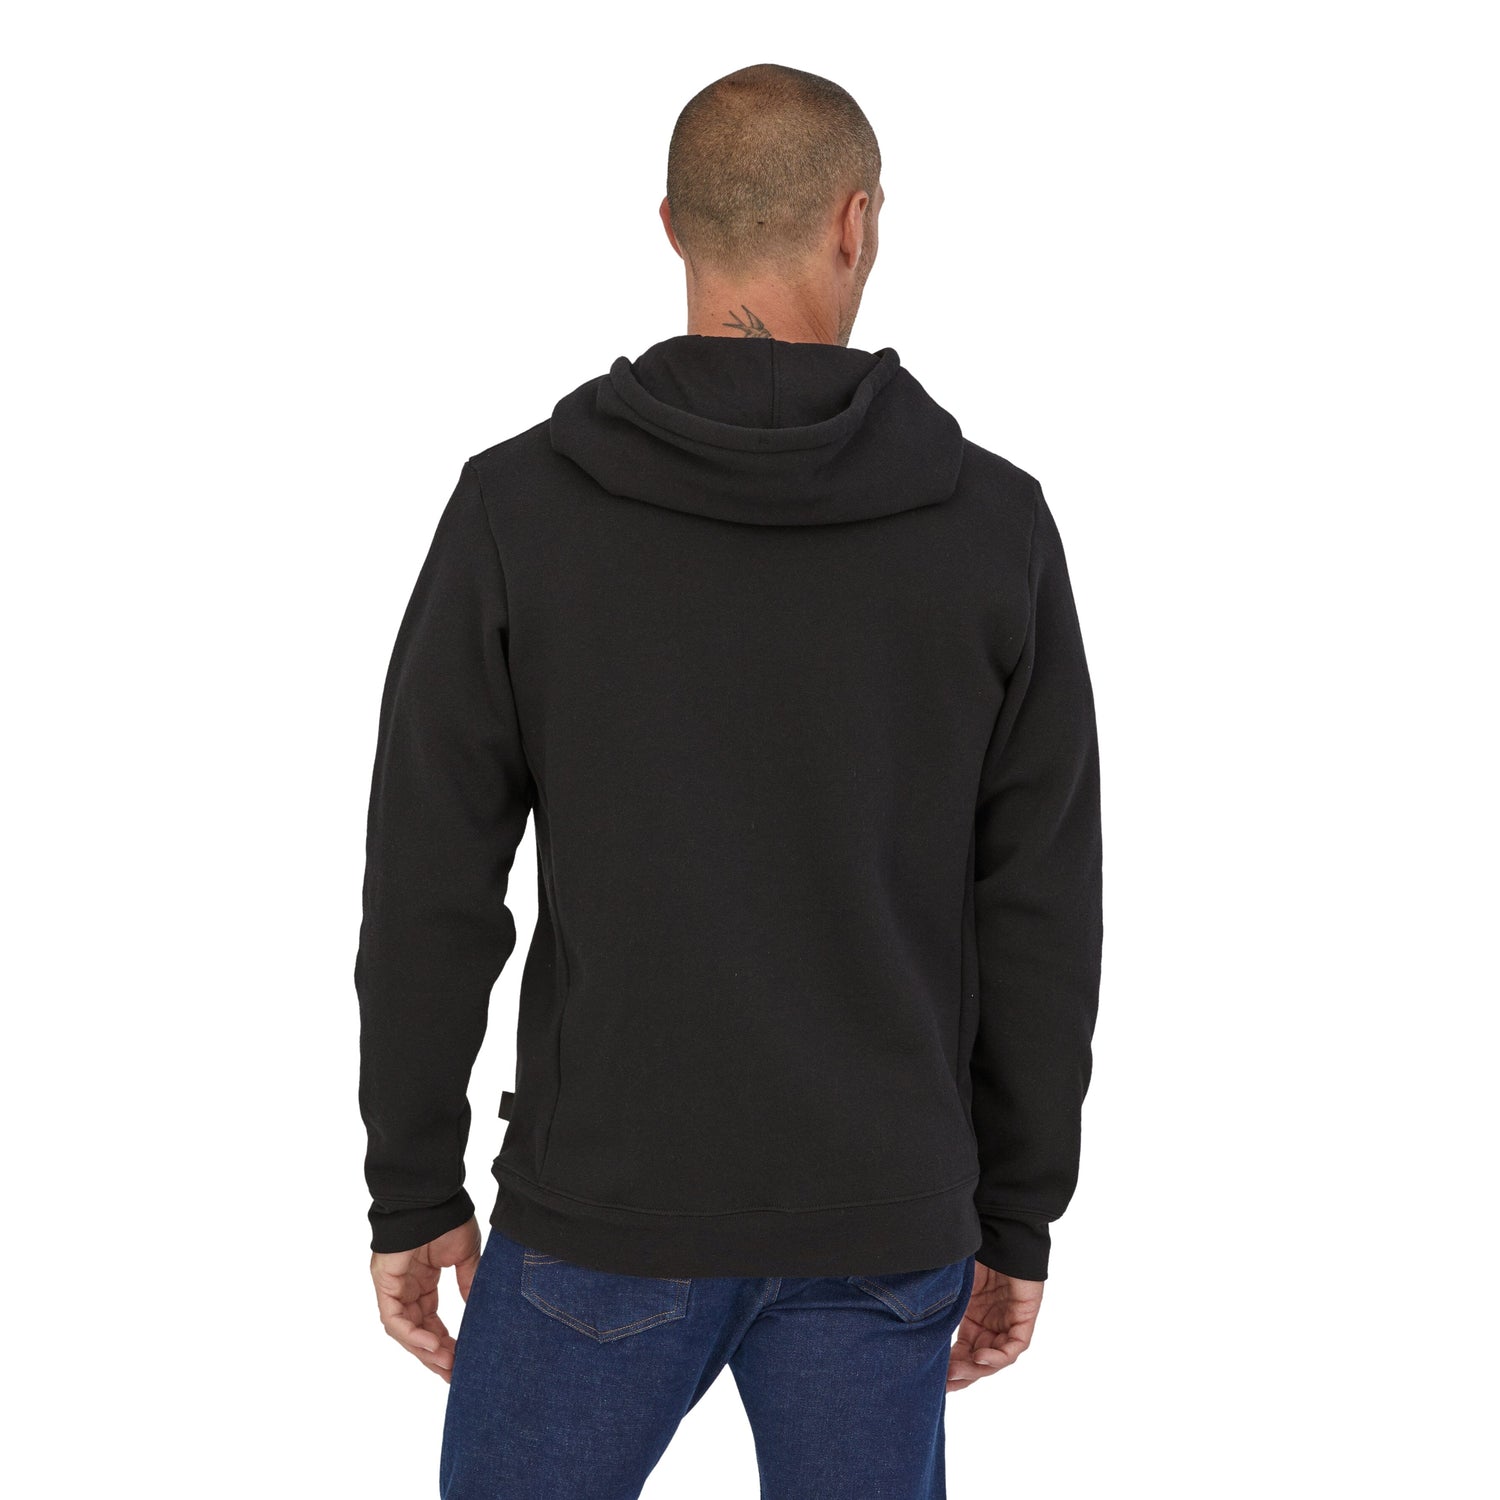 Patagonia Unisex P-6 Logo Uprisal Hoody - Made From Recycled Cotton & Recycled Polyester Black Shirt